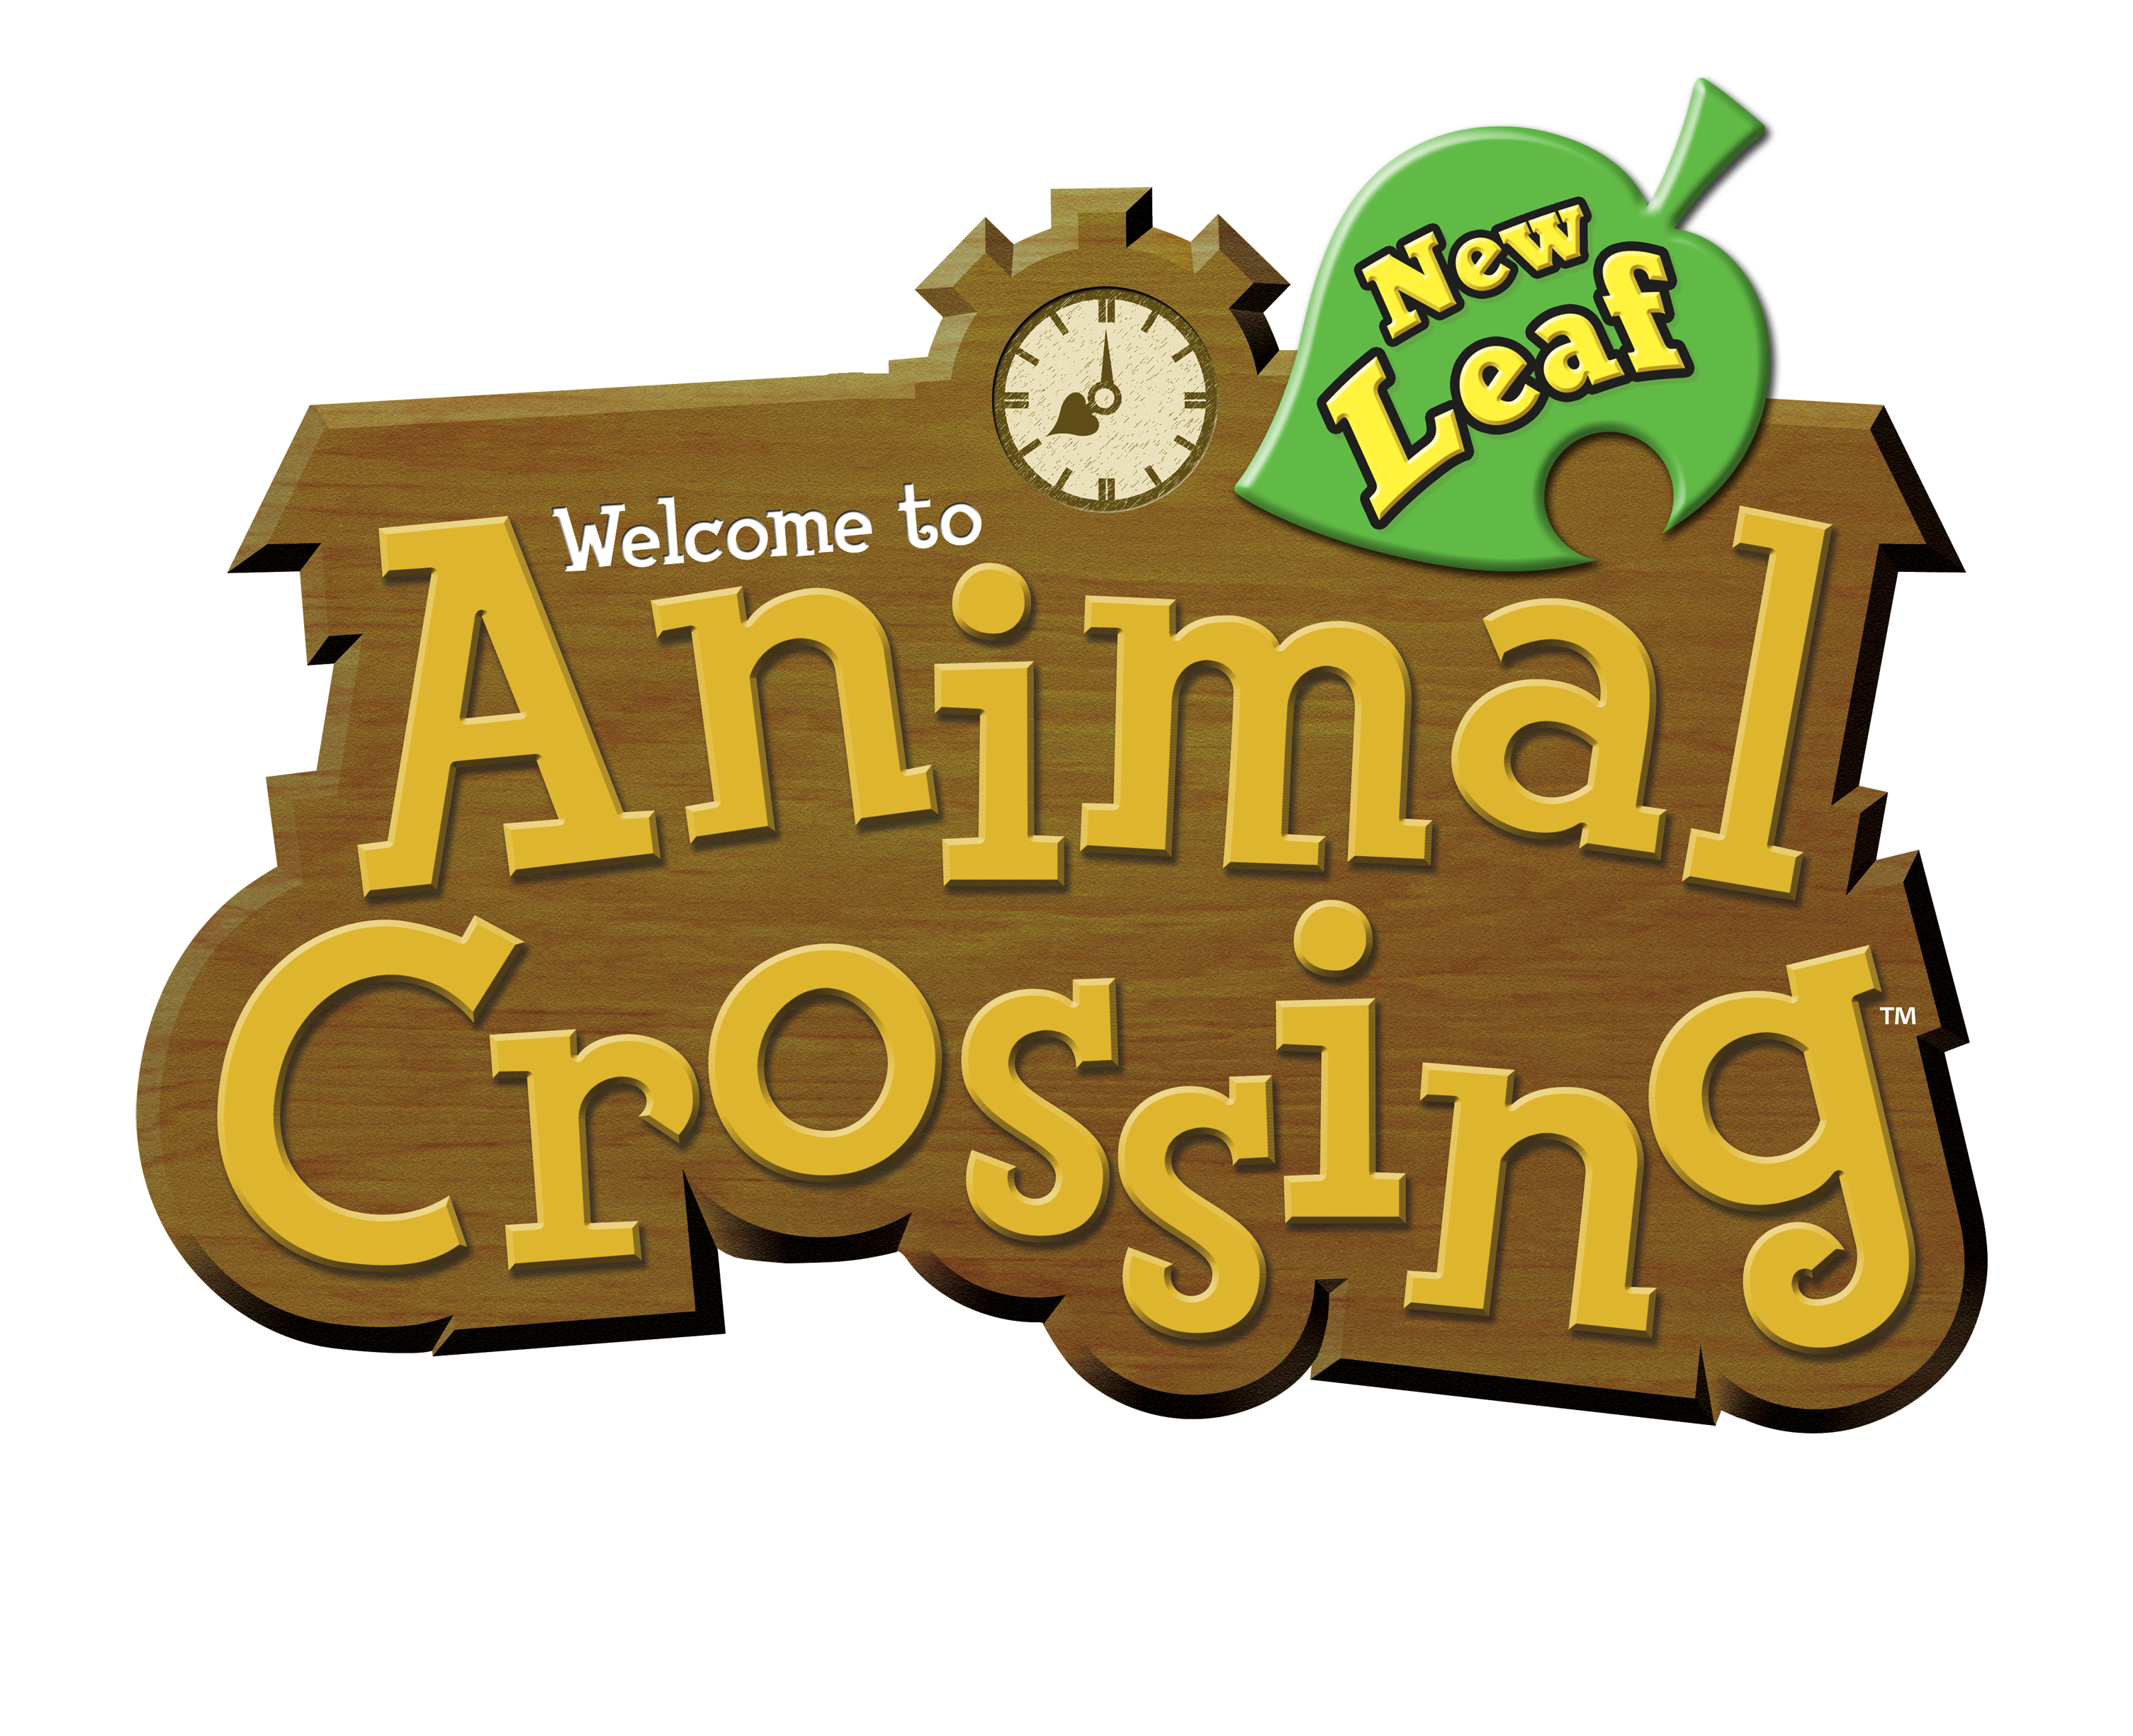 animal crossing 3ds games